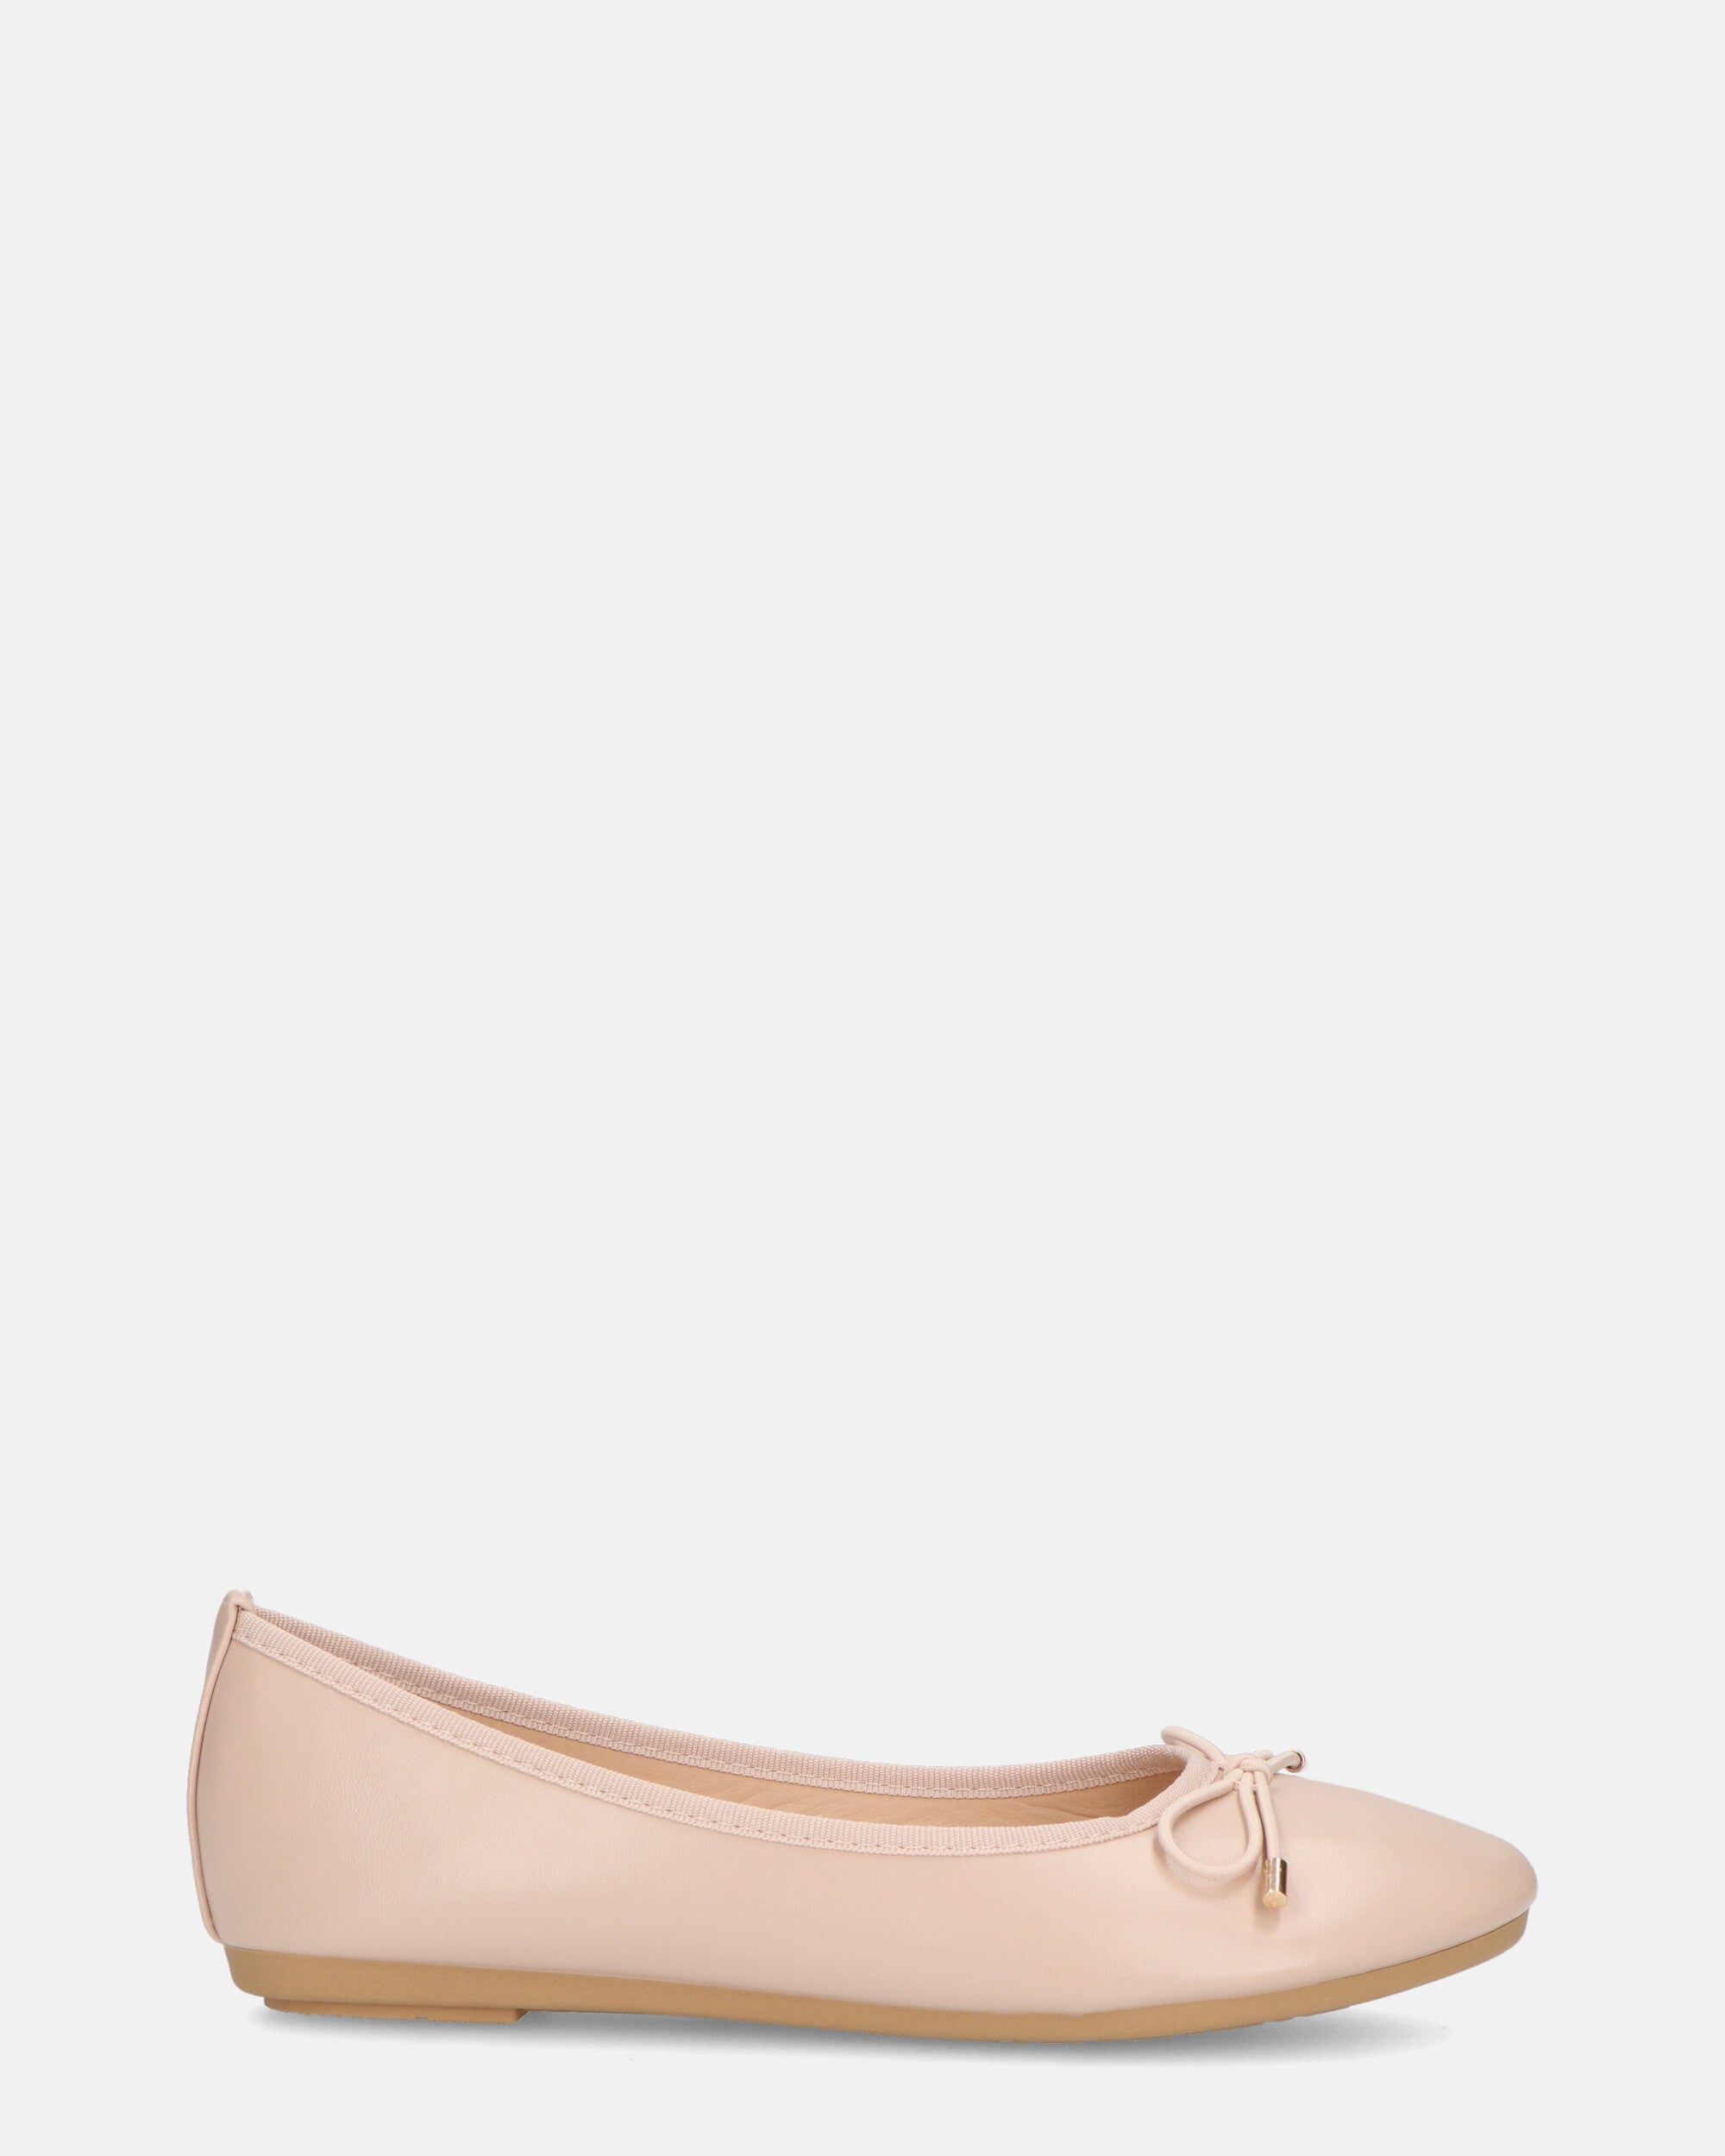 GWEN - beige ballet flats with bow on toe